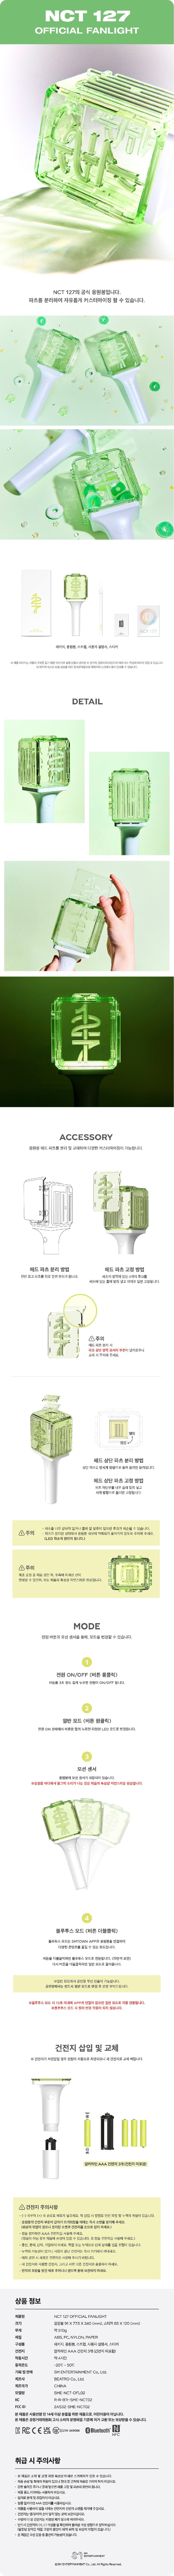 [PRE-ORDER ONLY] NCT OFFICIAL LIGHT STICK VER.2 (NCT 127 VER.)